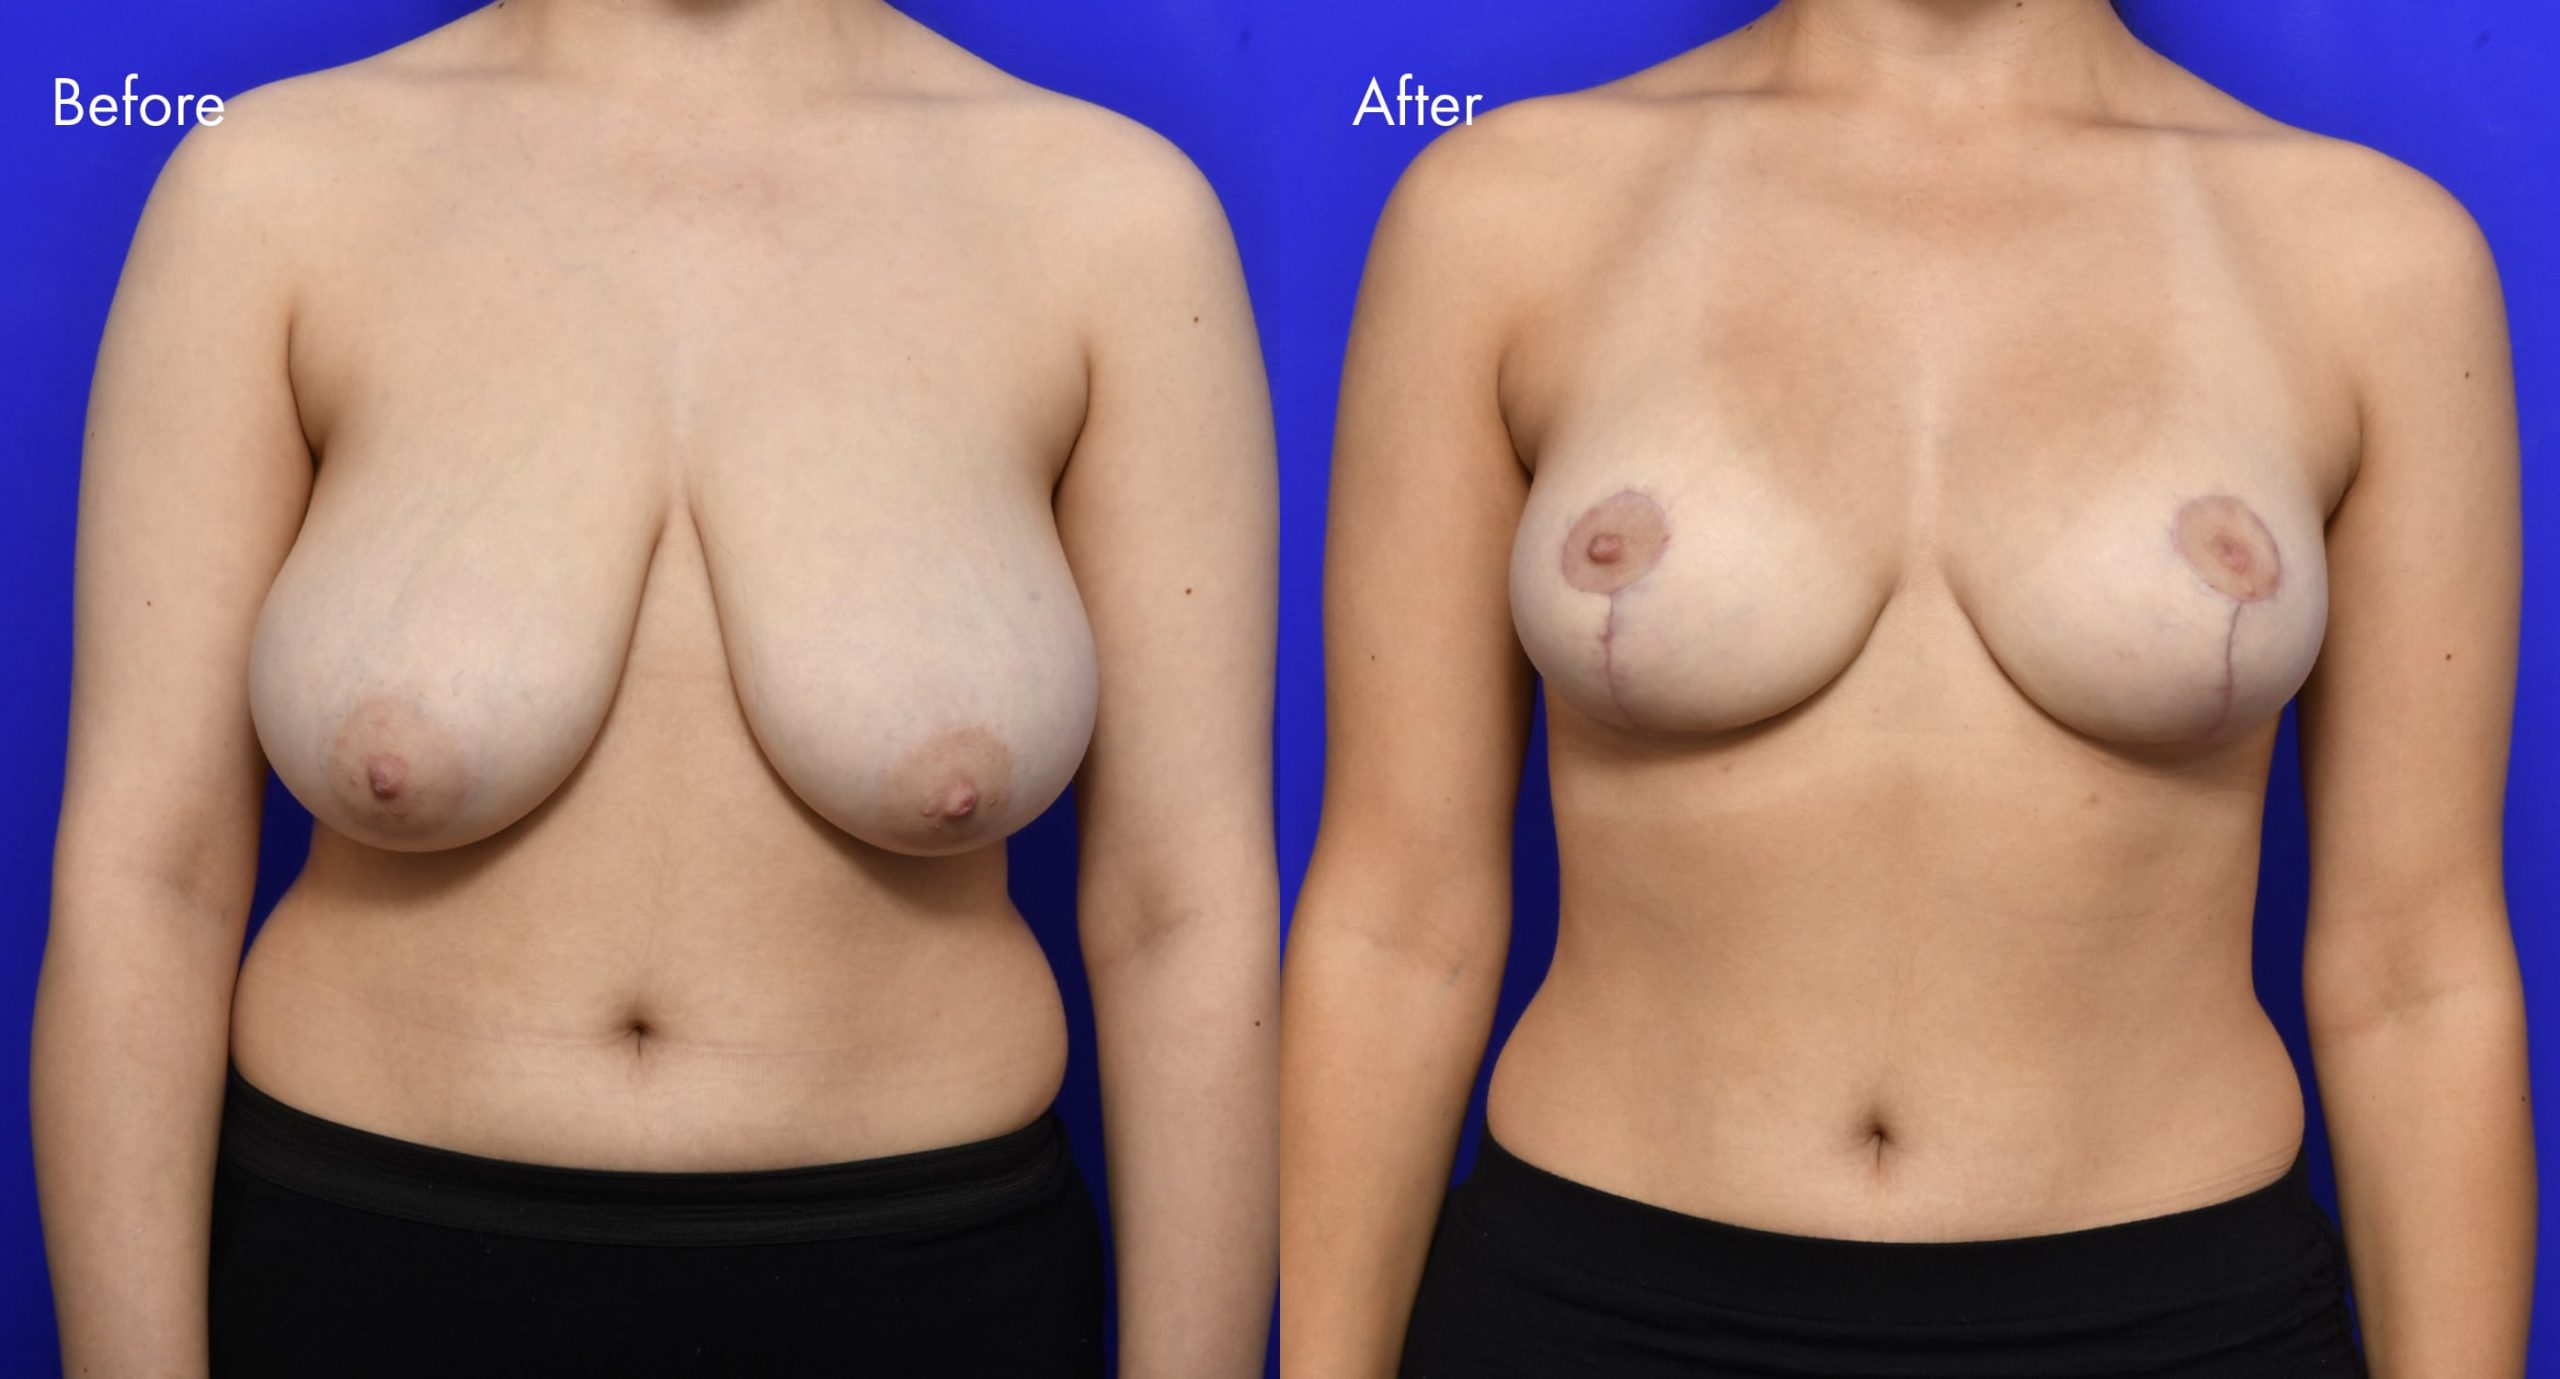 Plastic Surgery Before and After Gallery | 9